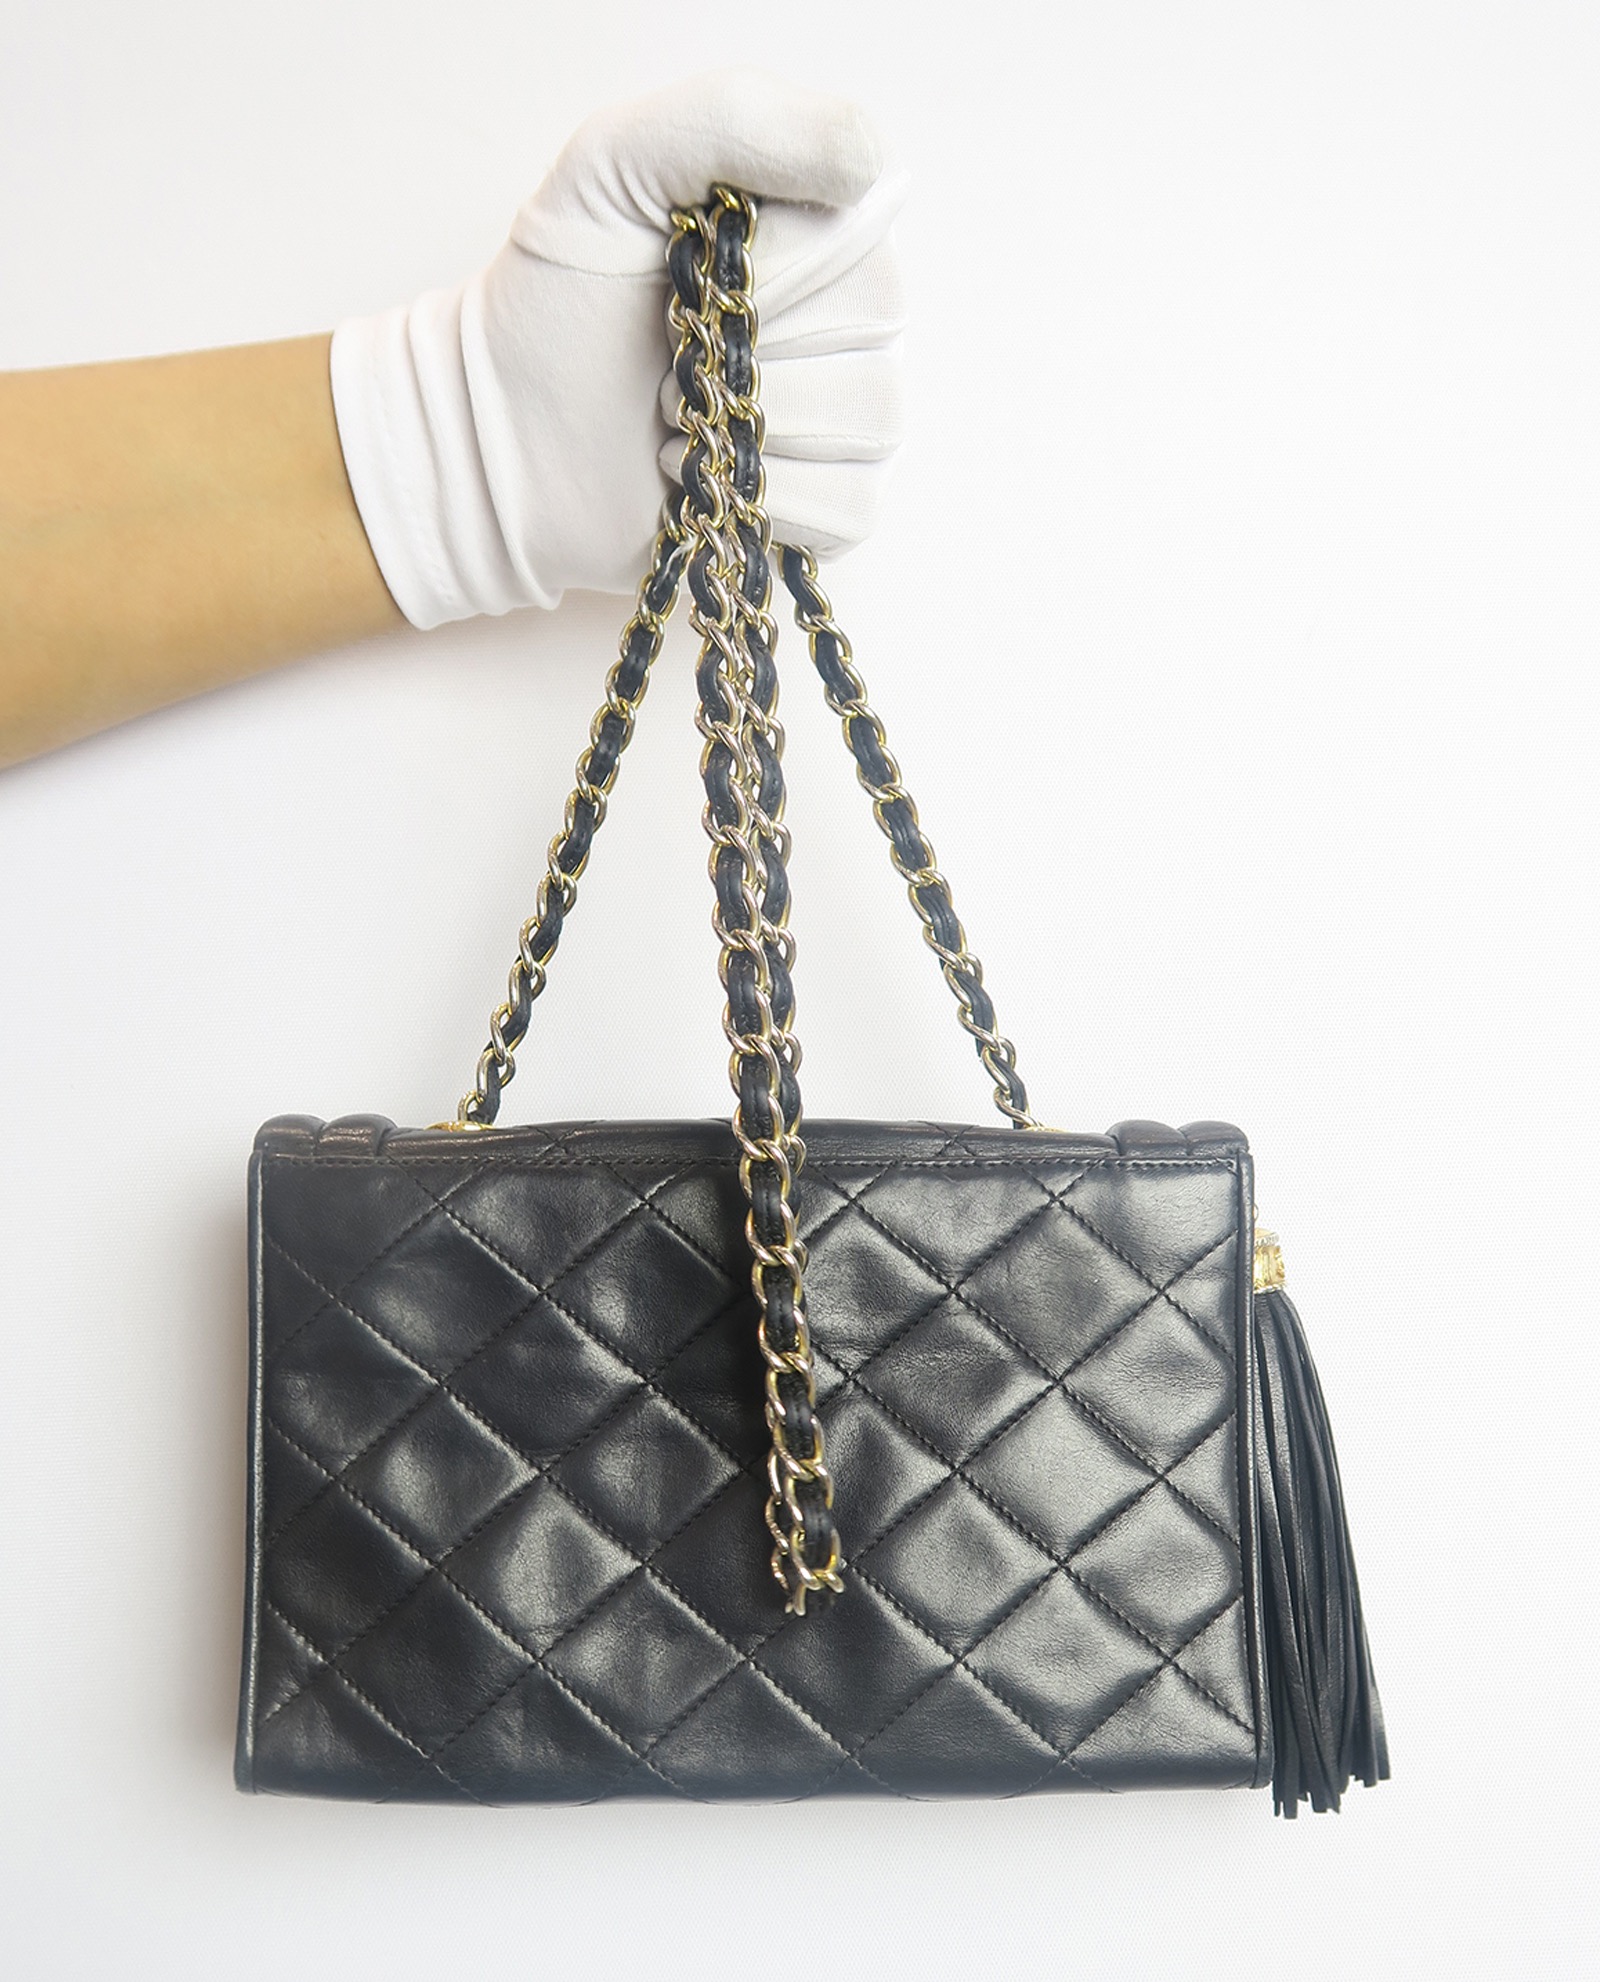 SOLD Chanel Quilted Taupe Lizard Flap Front Tassel Shoulder Bag Early –  Palm Beach Vintage